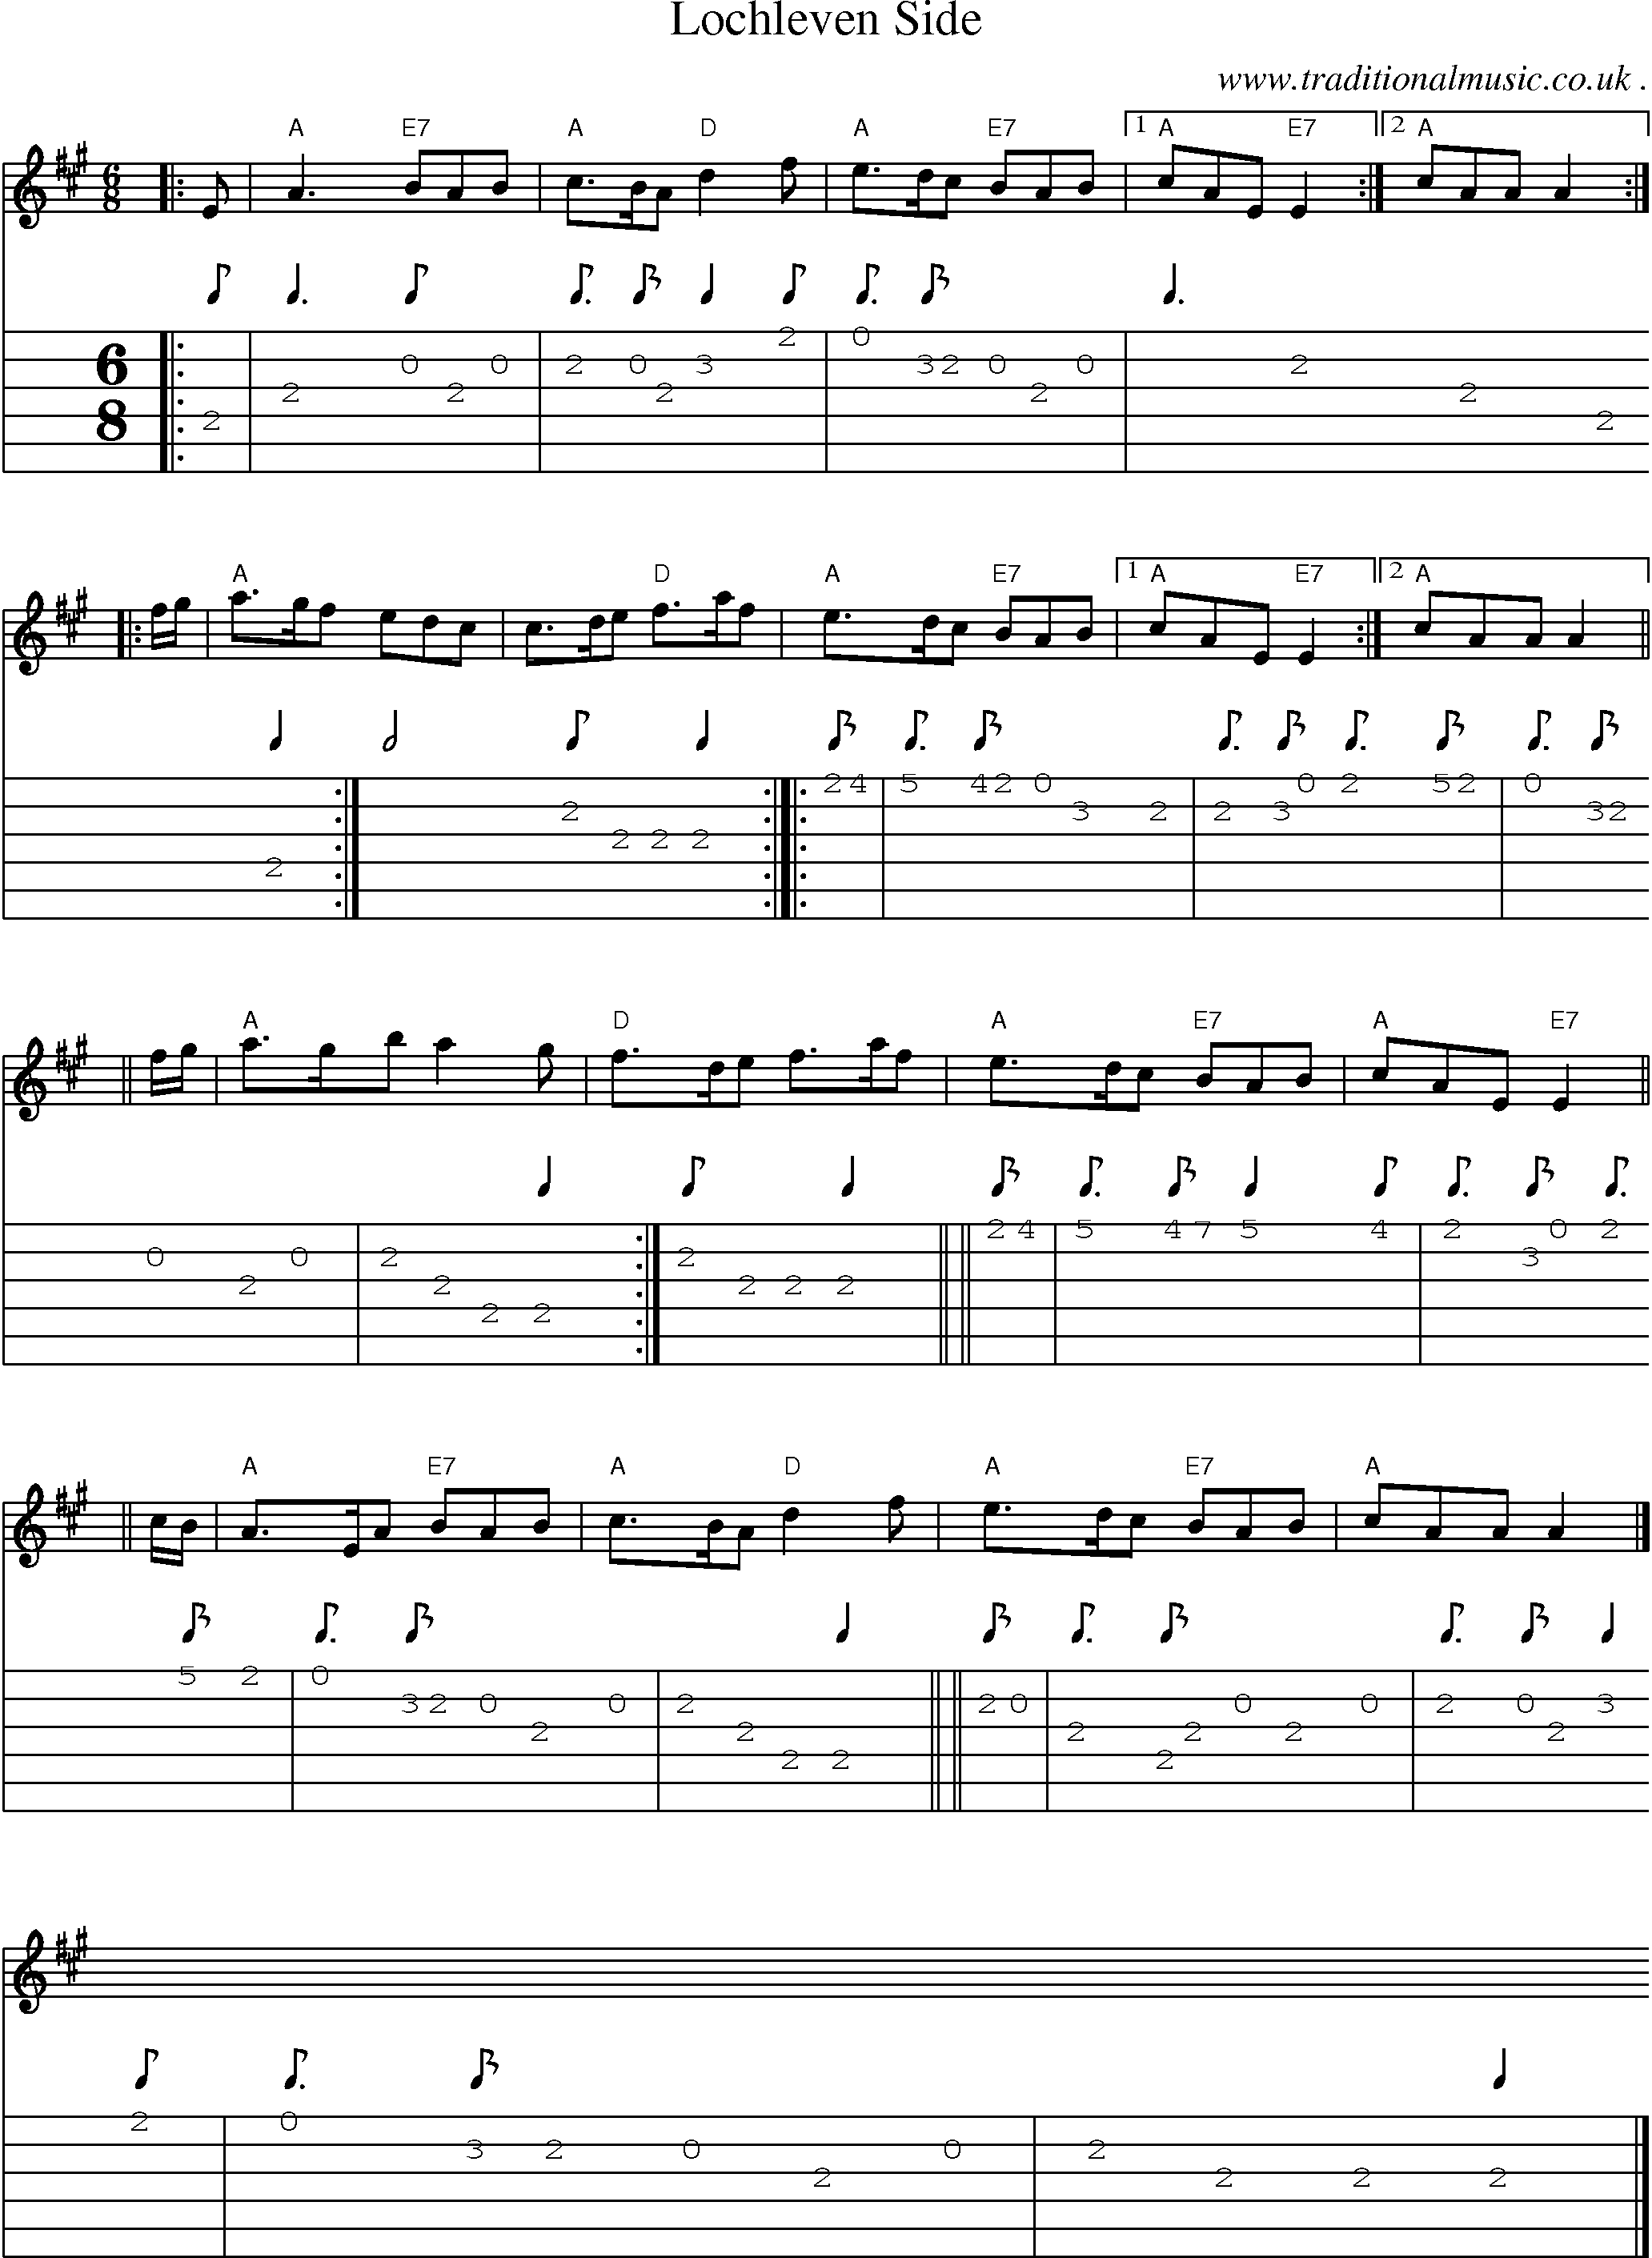 Sheet-music  score, Chords and Guitar Tabs for Lochleven Side